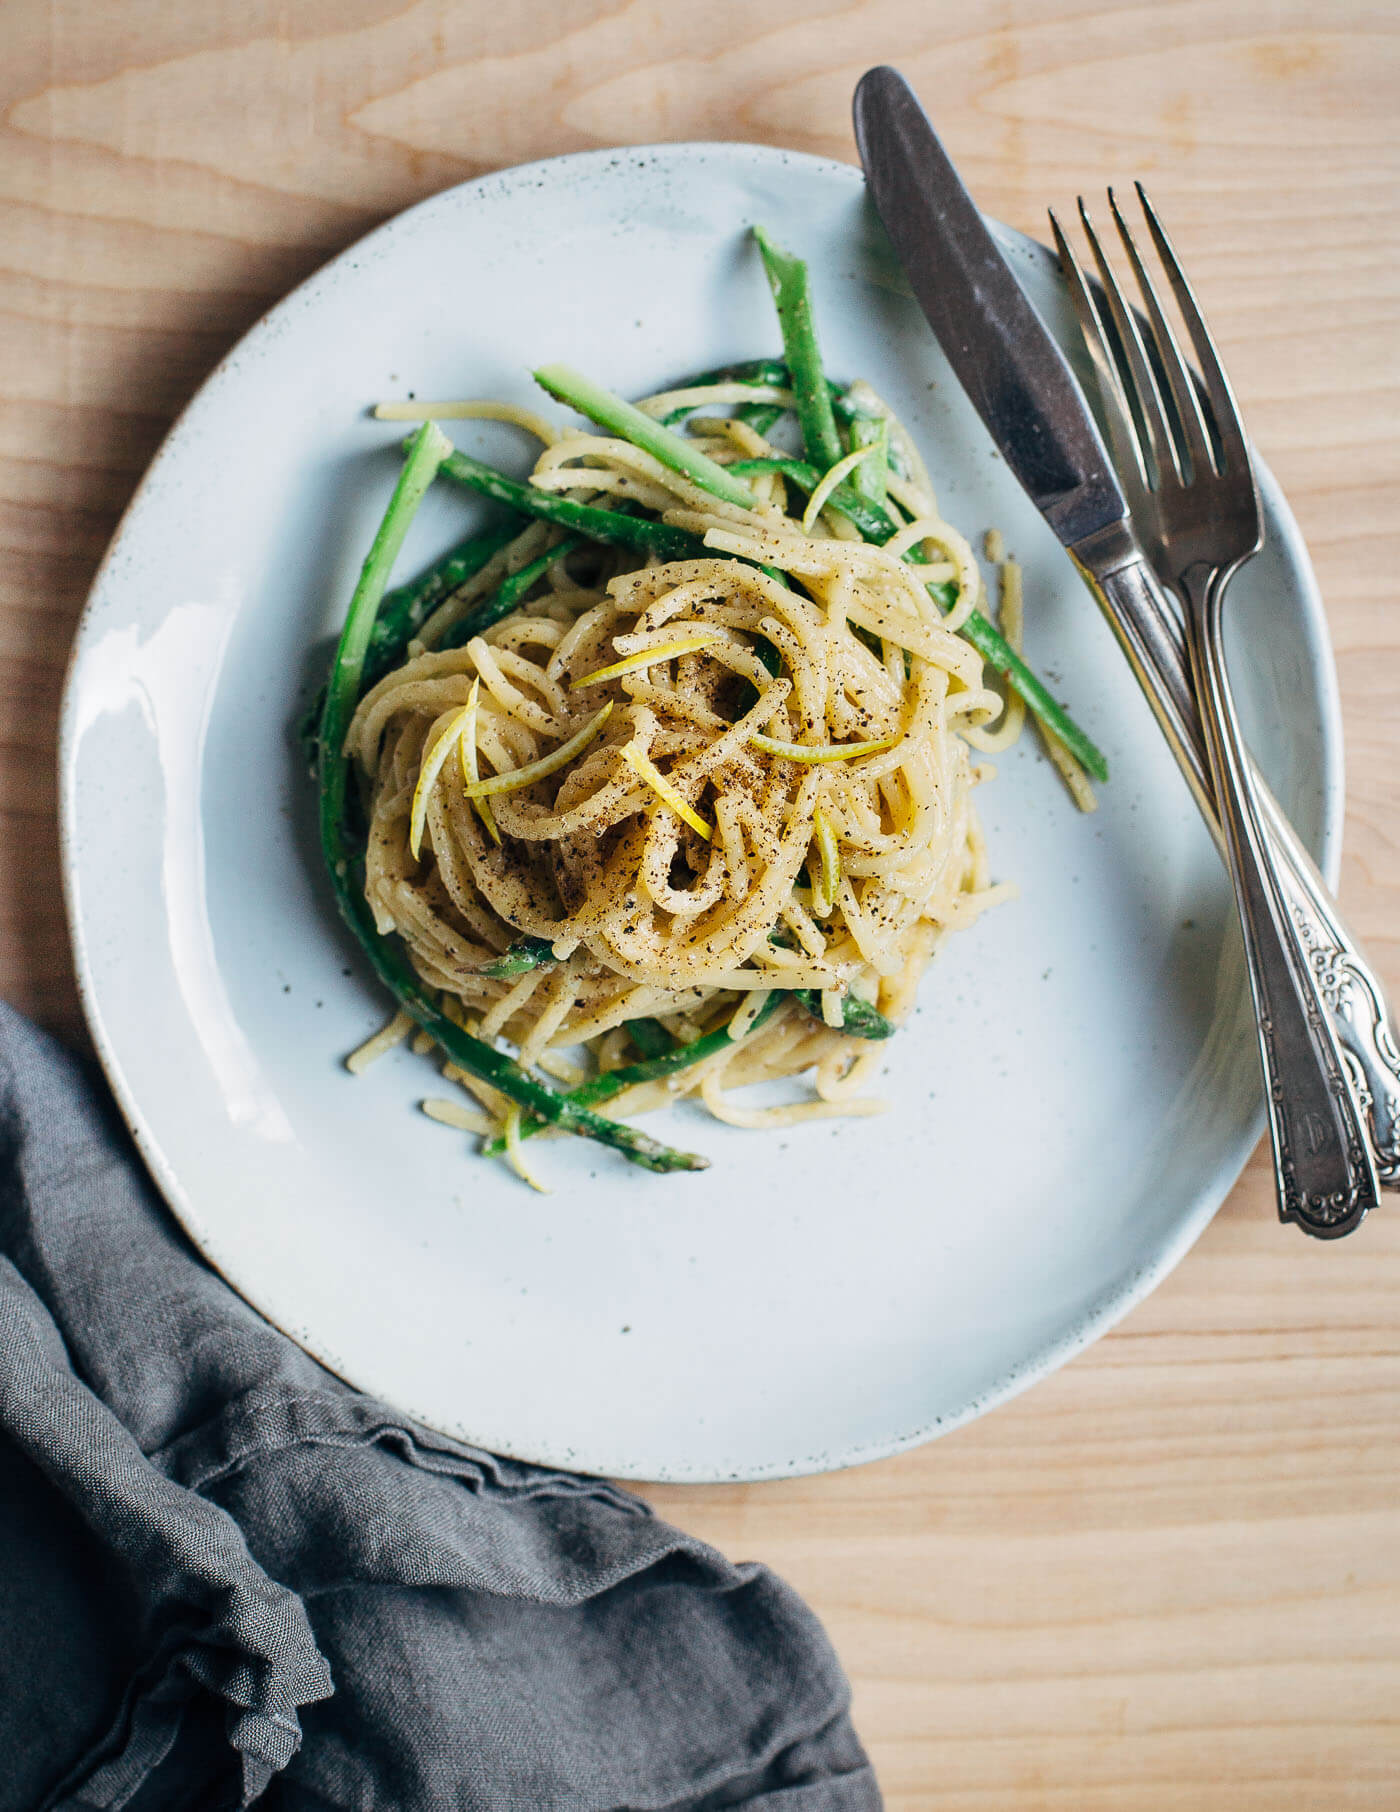 Cacio e pepe with asparagus offers a springtime twist on the classic pasta dish. The dish comes together quickly for weeknight ease and hits all the right notes with peppery, creamy spaghetti and tender spring asparagus.